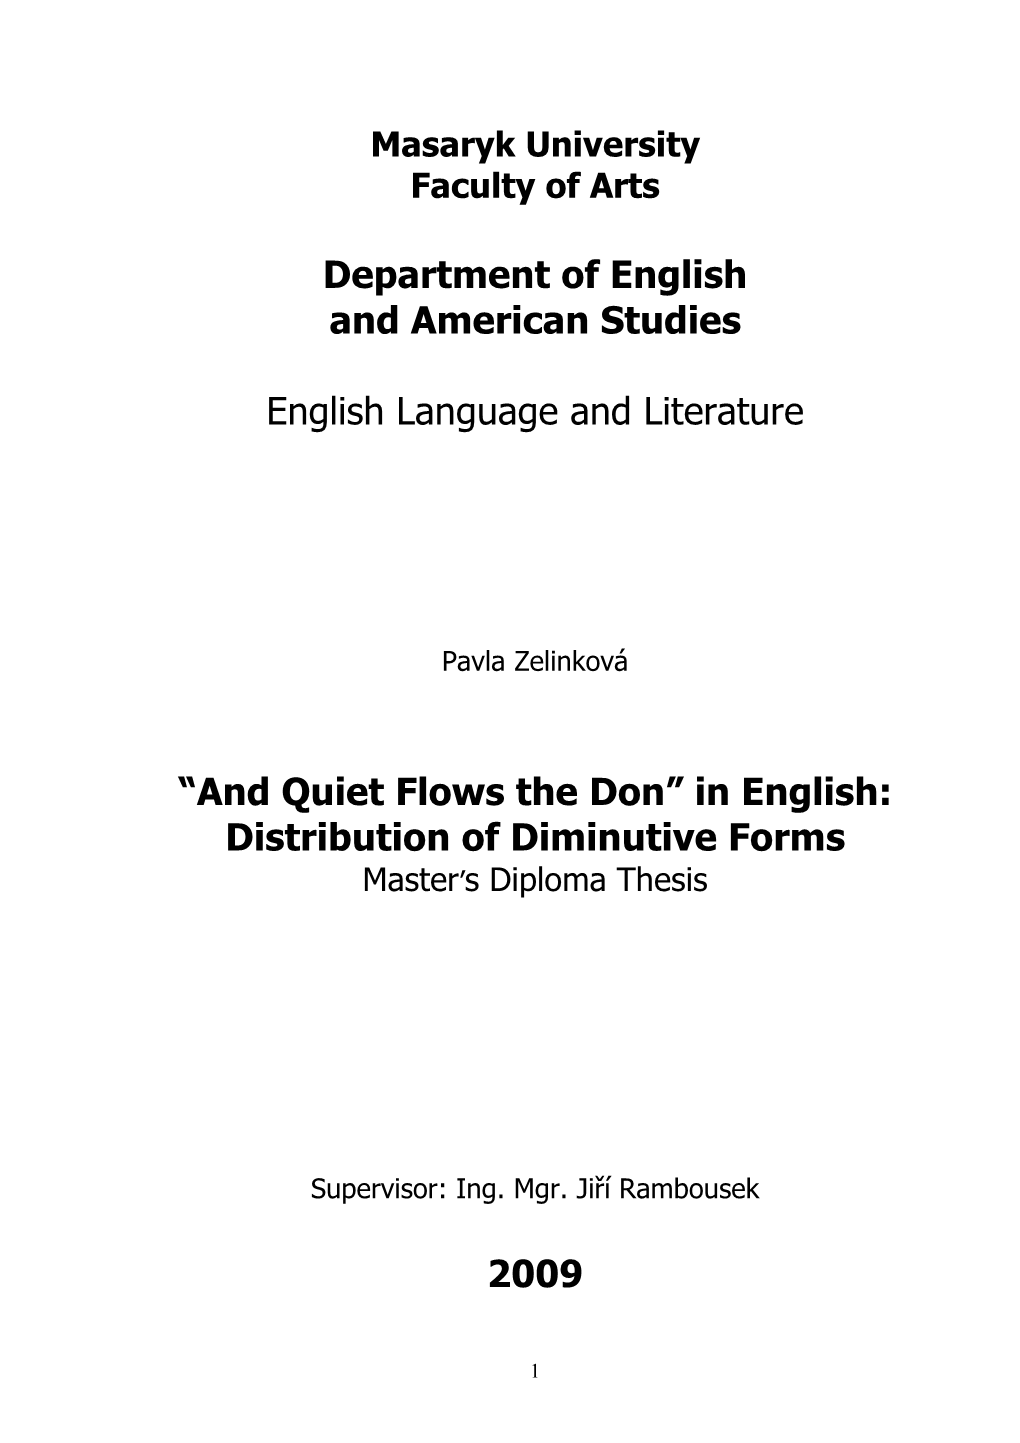 Sholokhov's and Quiet Flows the Don in English Translation: Comparing Language Systems